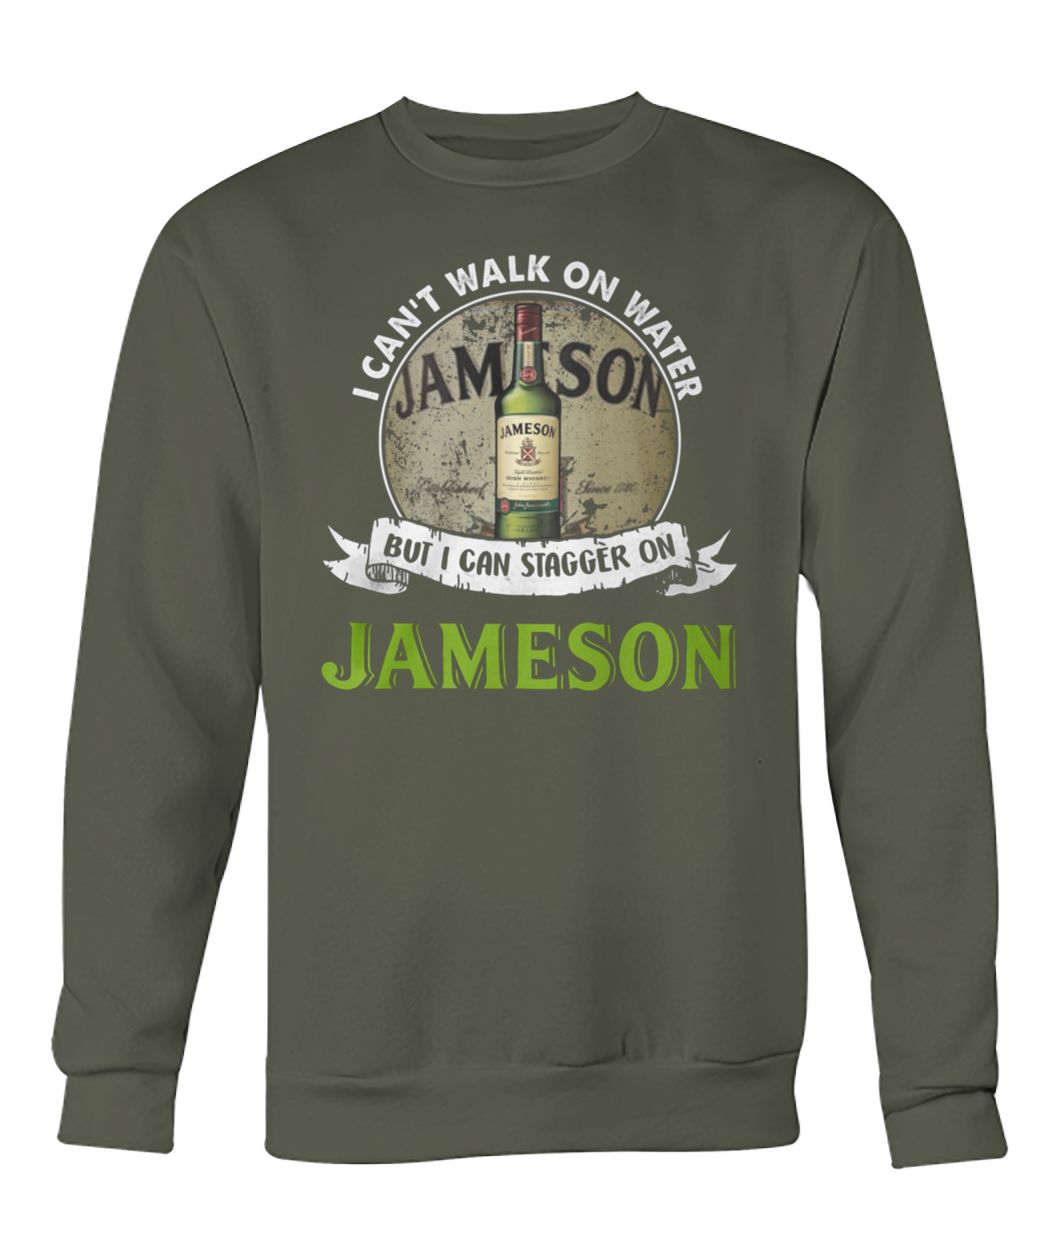 I can't walk on water but I can stagger on jameson crew neck sweatshirt